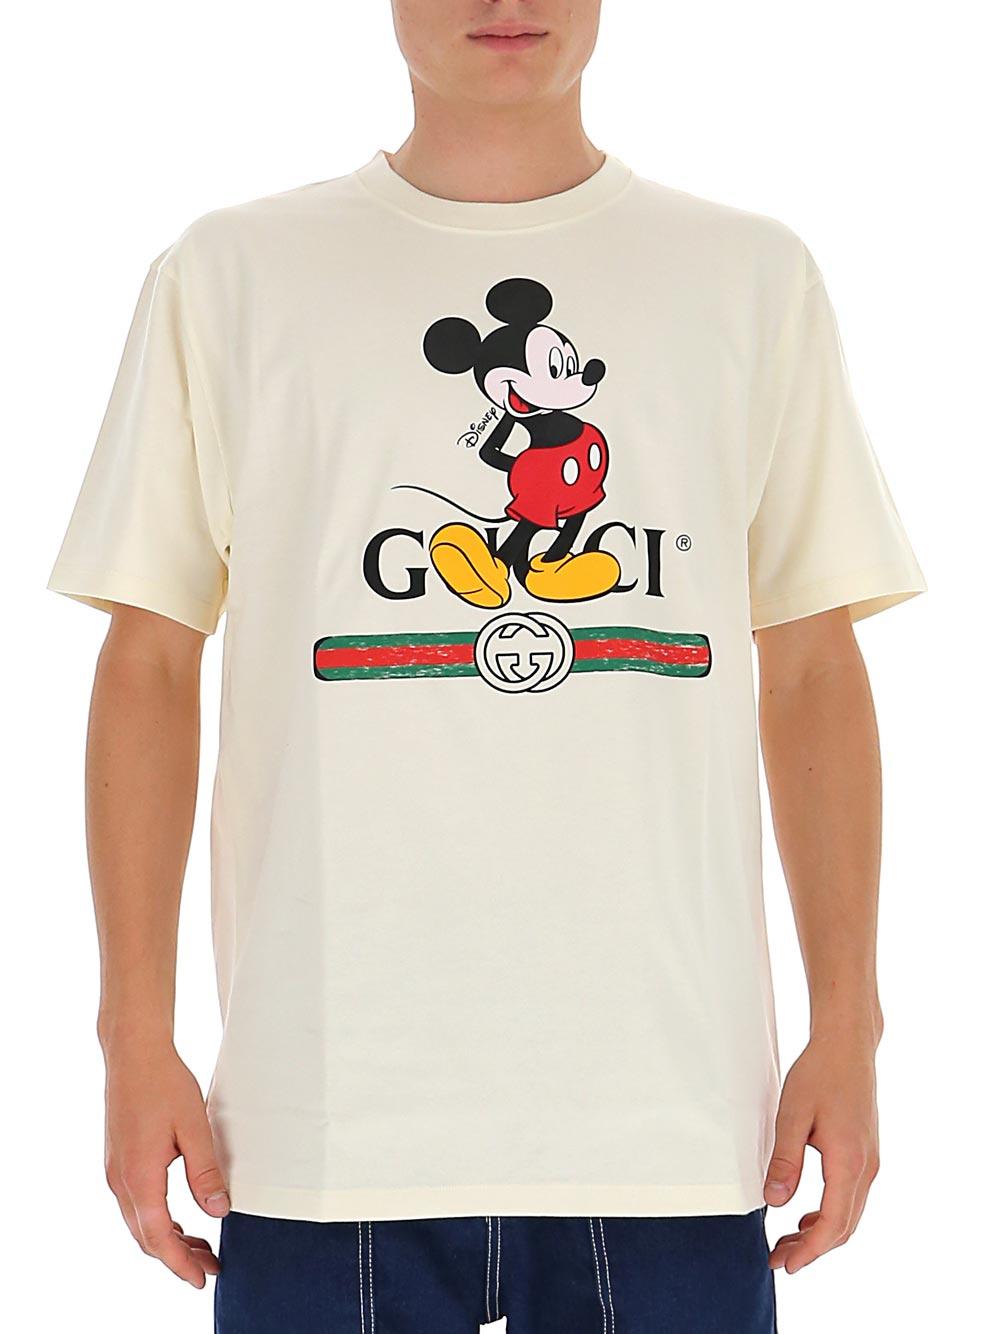 Gucci Cotton X Disney Oversized T-shirt in Beige (Natural) for Men - Lyst